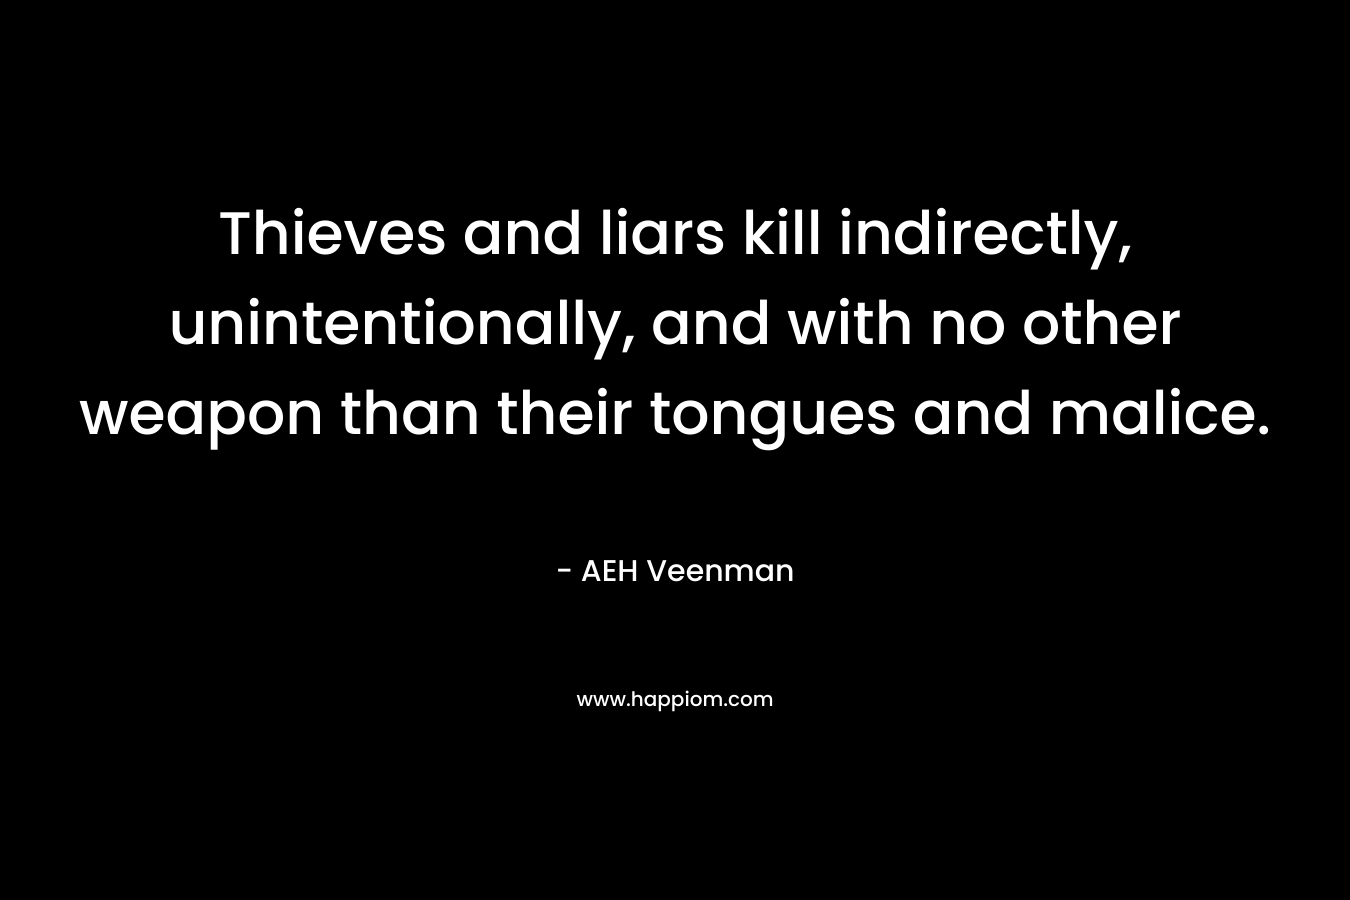 Thieves and liars kill indirectly, unintentionally, and with no other weapon than their tongues and malice. – AEH Veenman